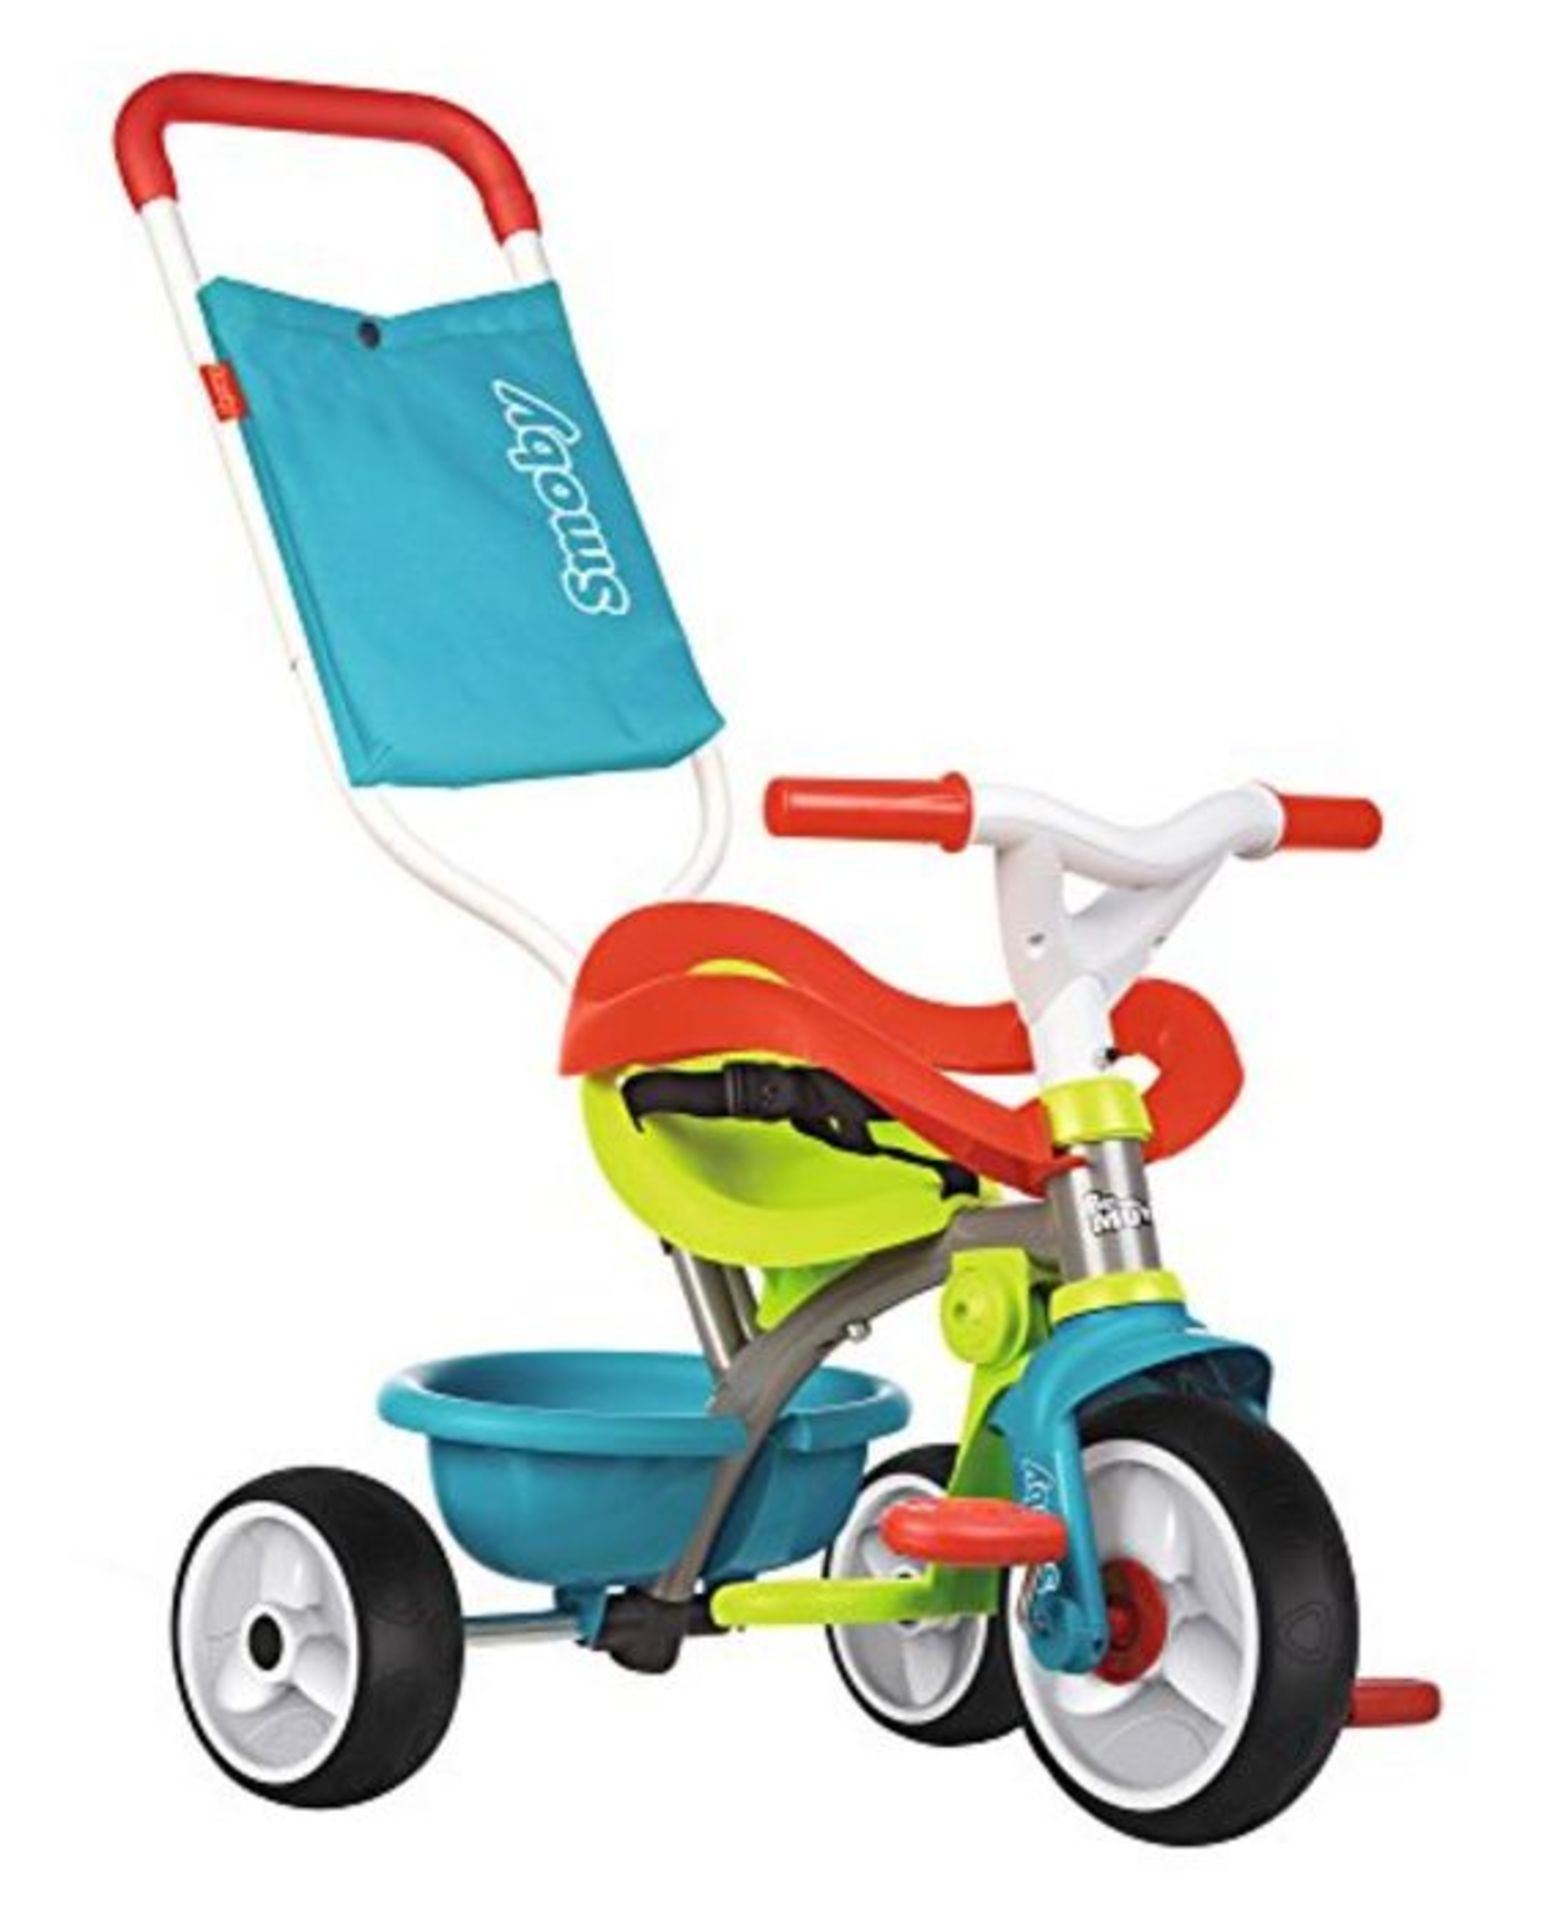 Smoby 740401 - tricycle be move comfort - tricycle upgradeable with silent wheels - bl